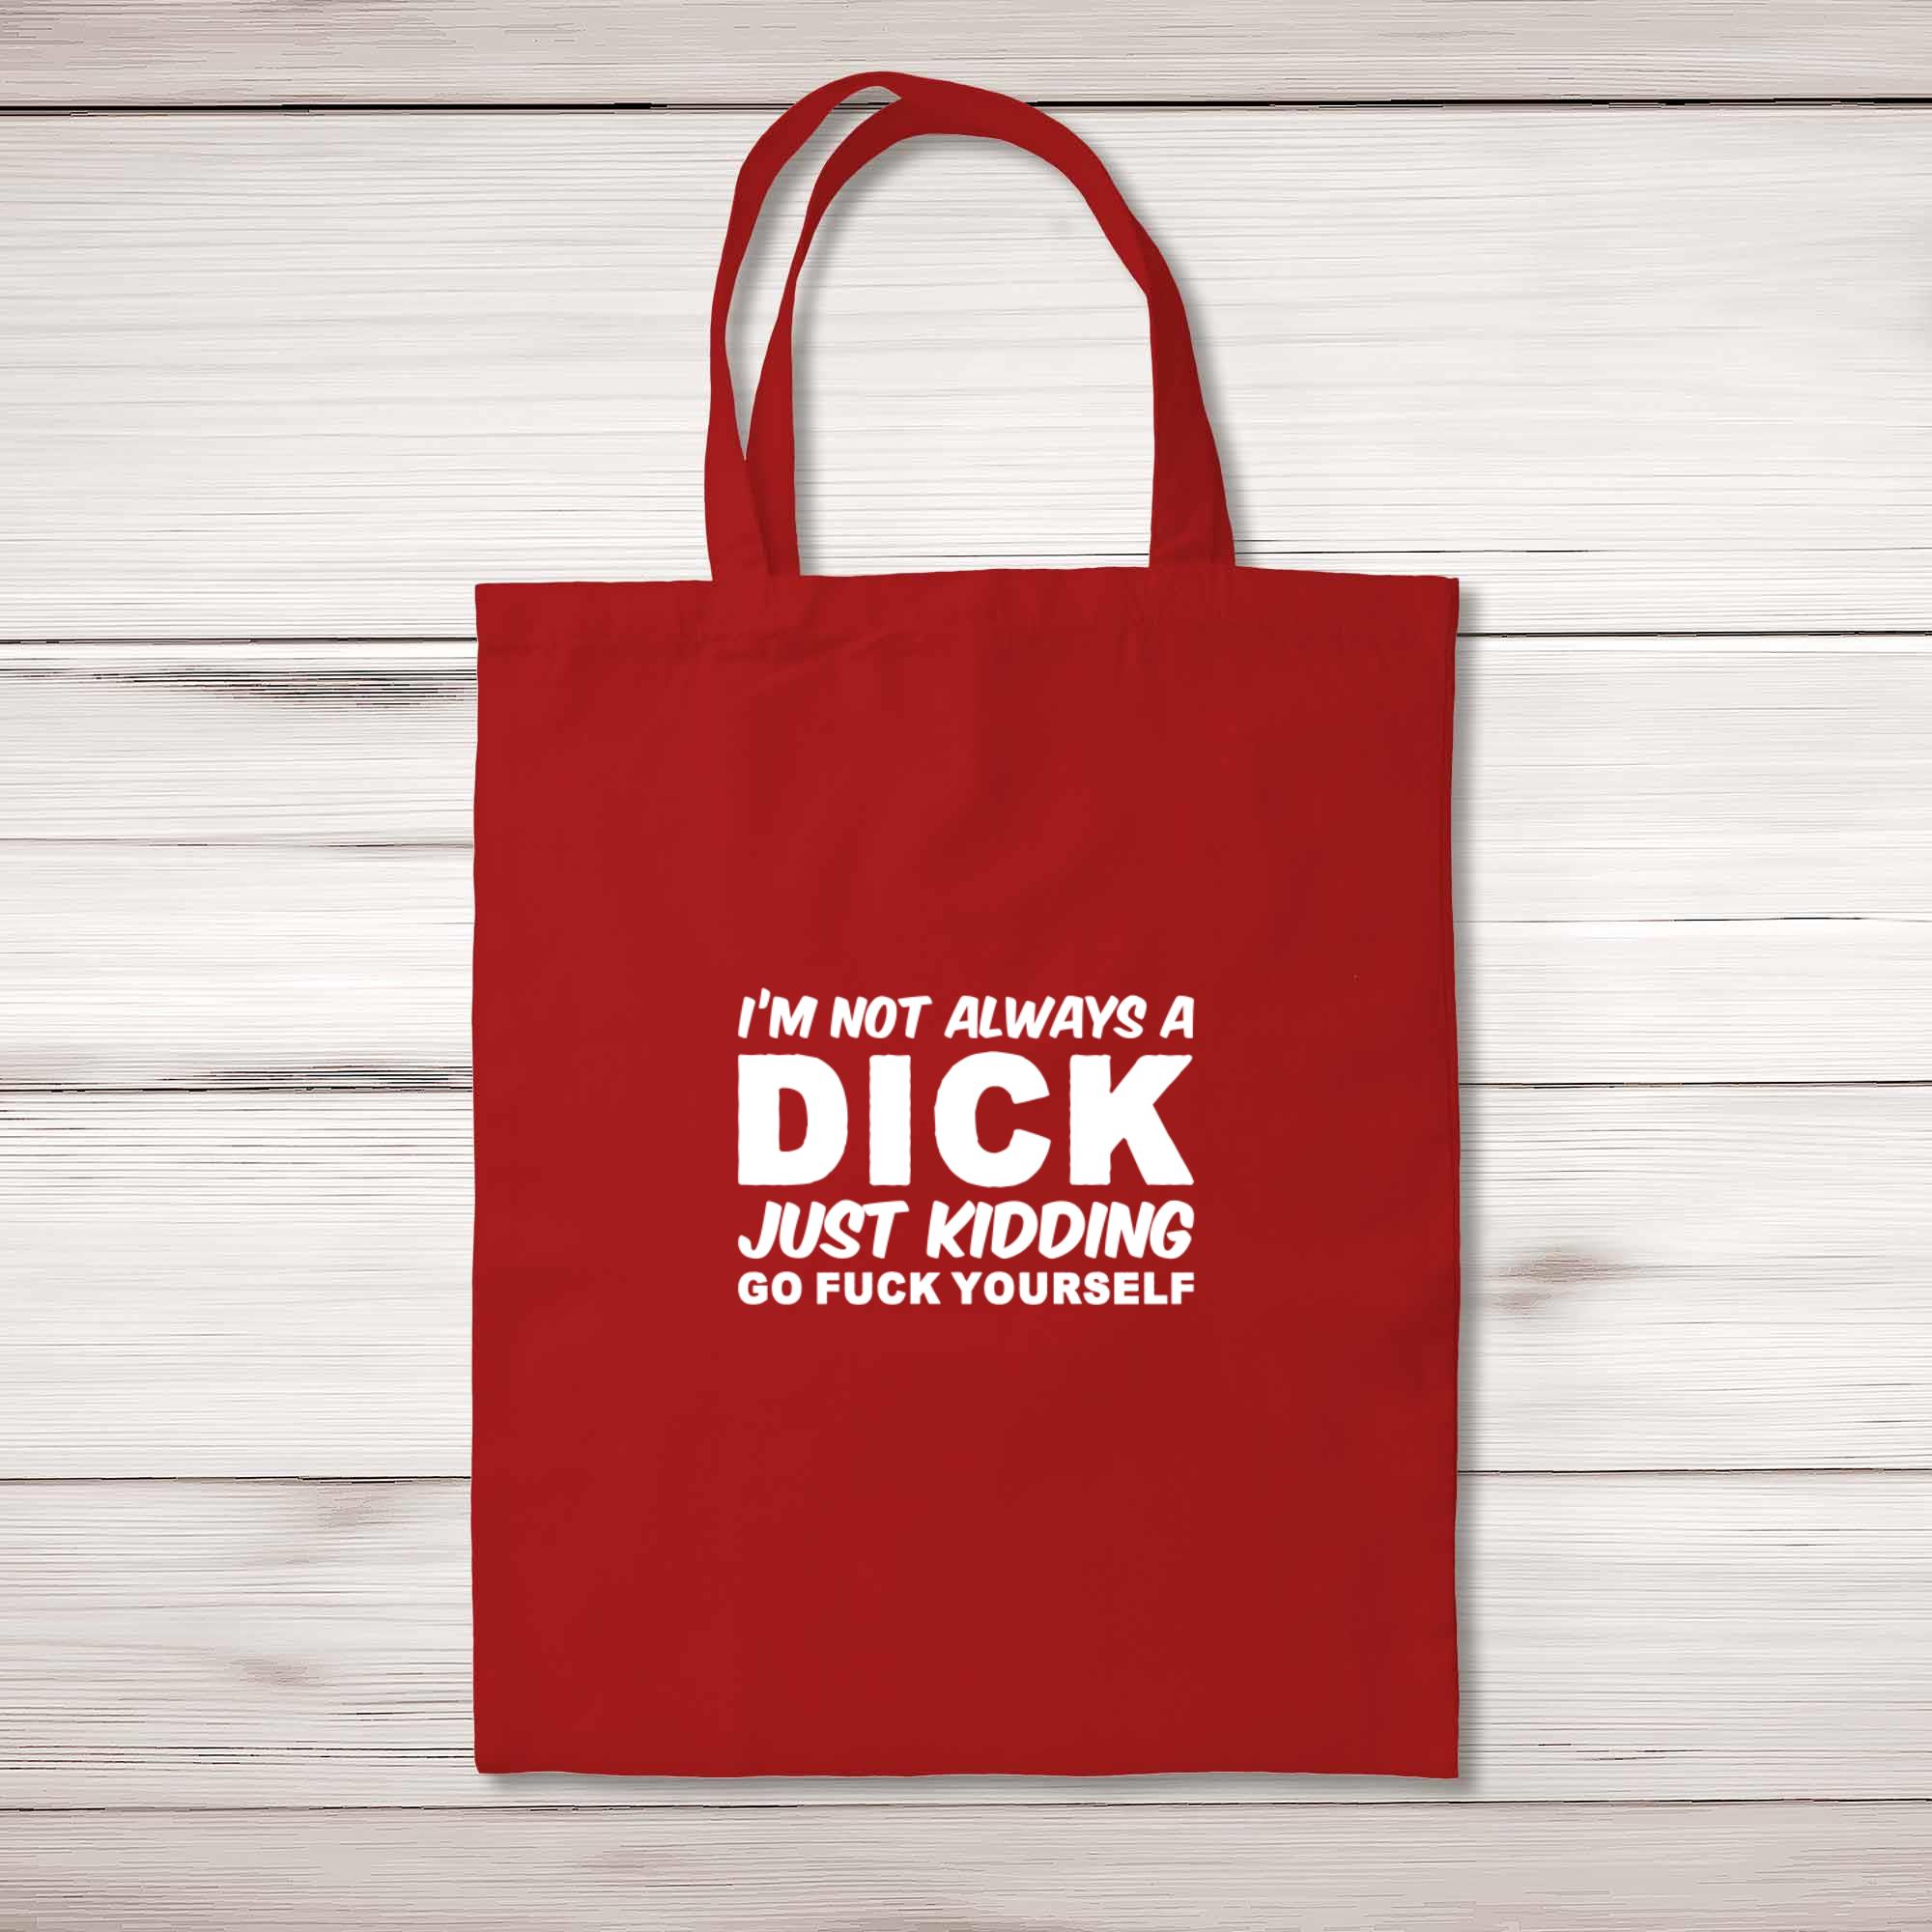 Don't Be A Dick Tote Bag - Funny Tote Bags L Talking Out of Turn by Always Fits